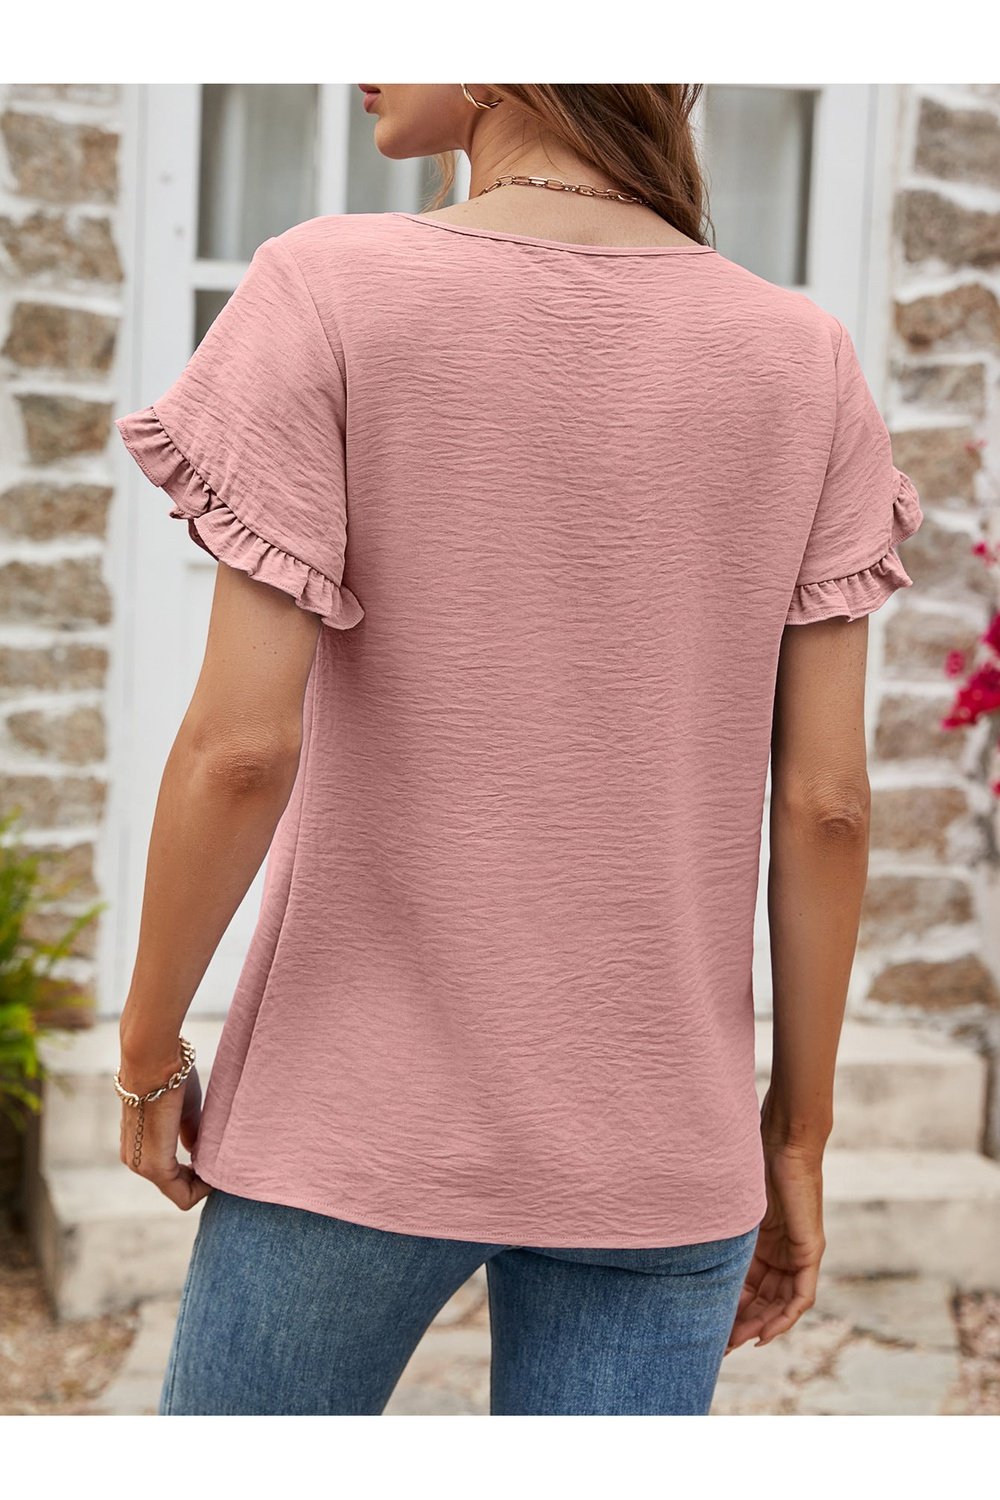 Textured Petal Sleeve Round Neck Tee - T-Shirts - FITGGINS